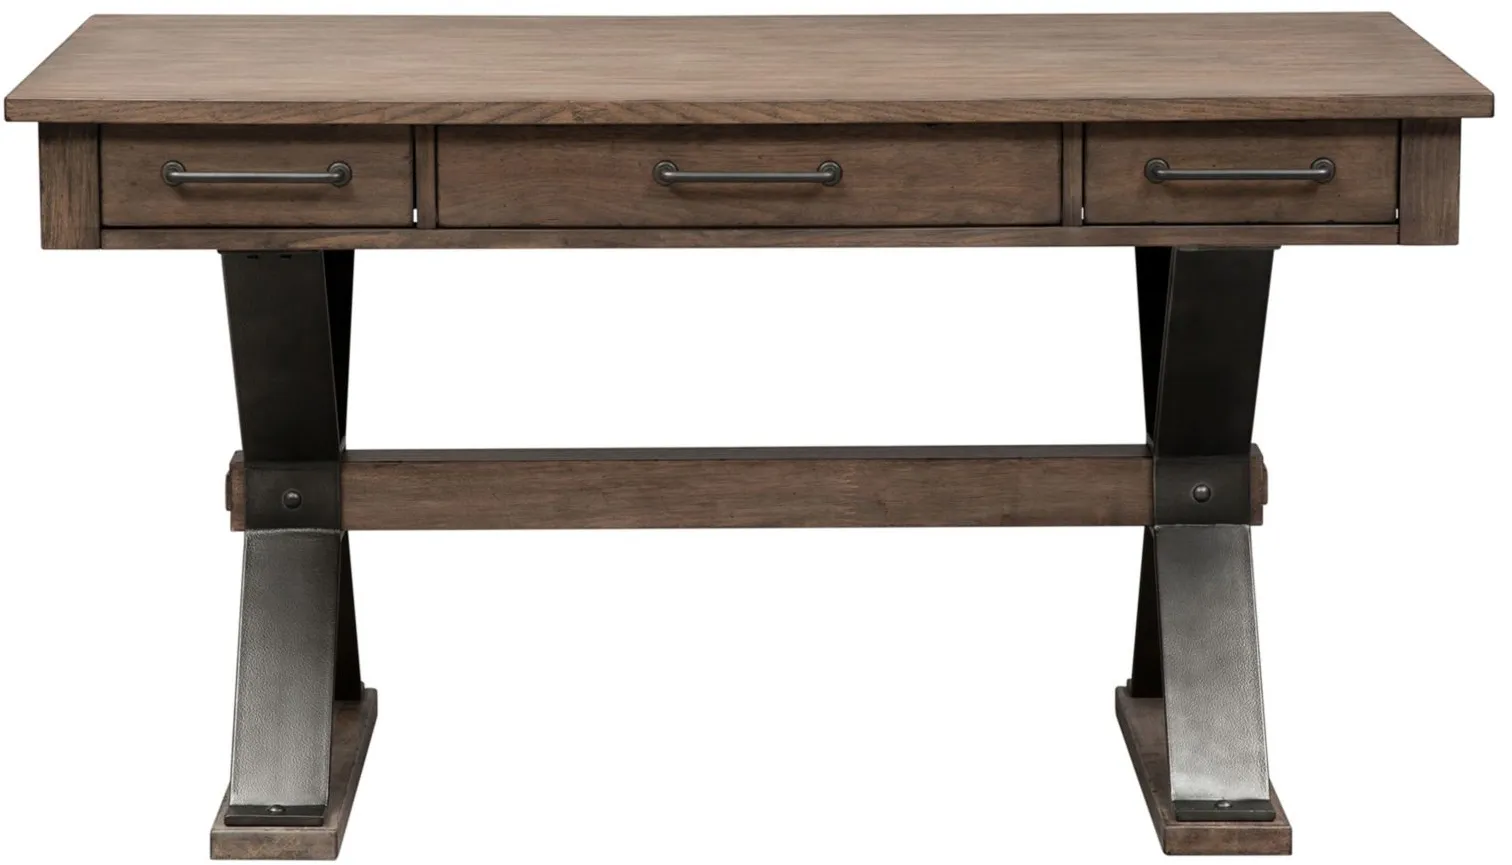 Sonoma Road Writing Desk in Weather Beaten Bark Finish by Liberty Furniture